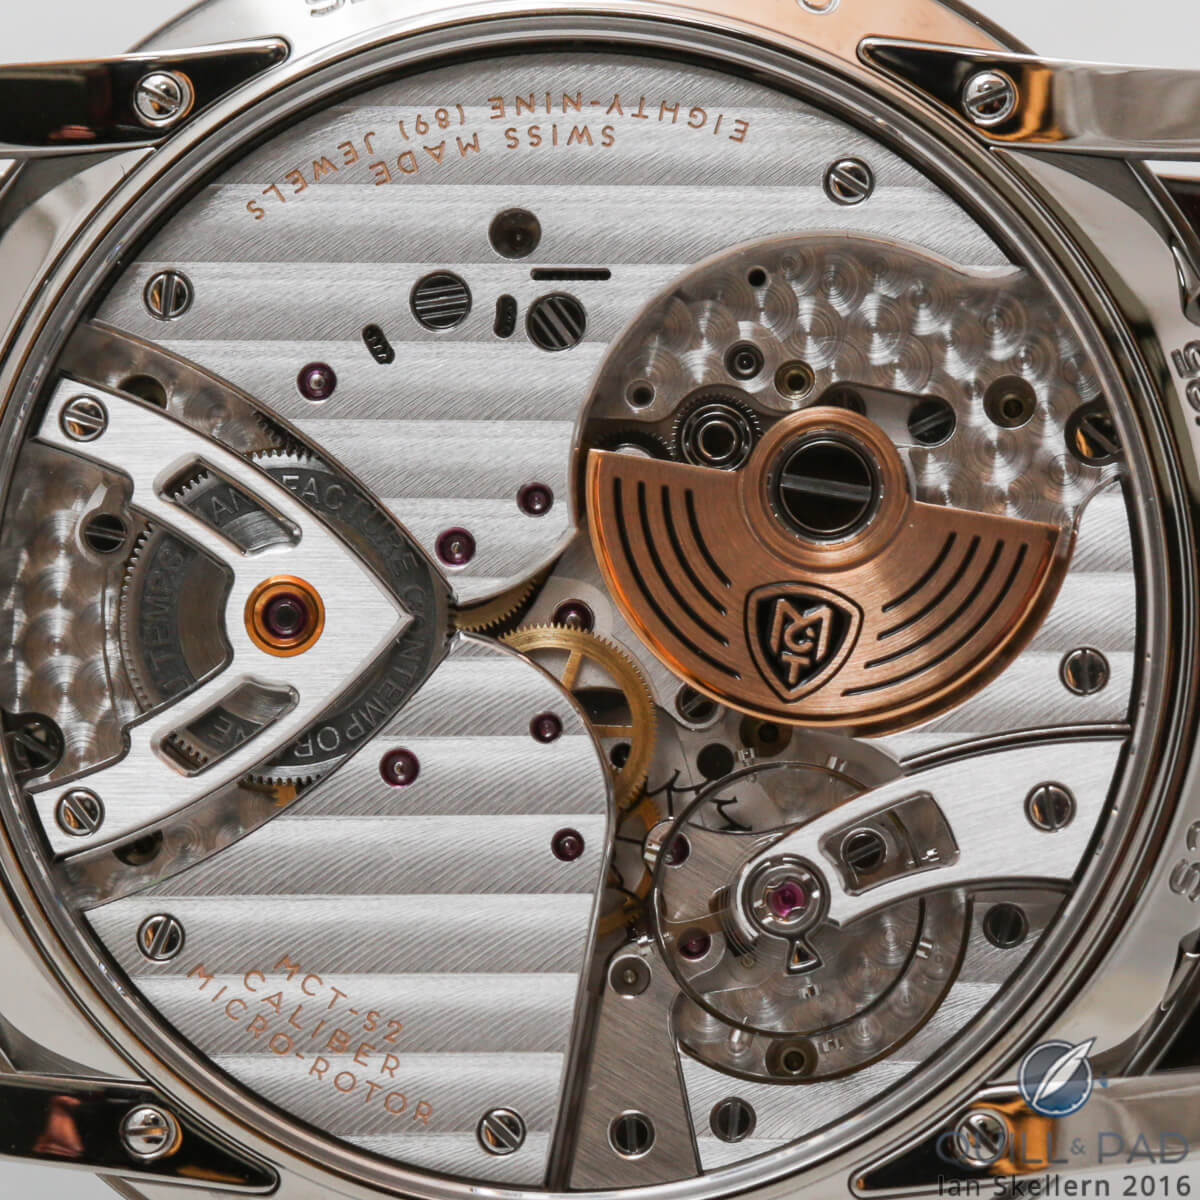 Close look at the nicely finished movement of the MCT Sequential S210